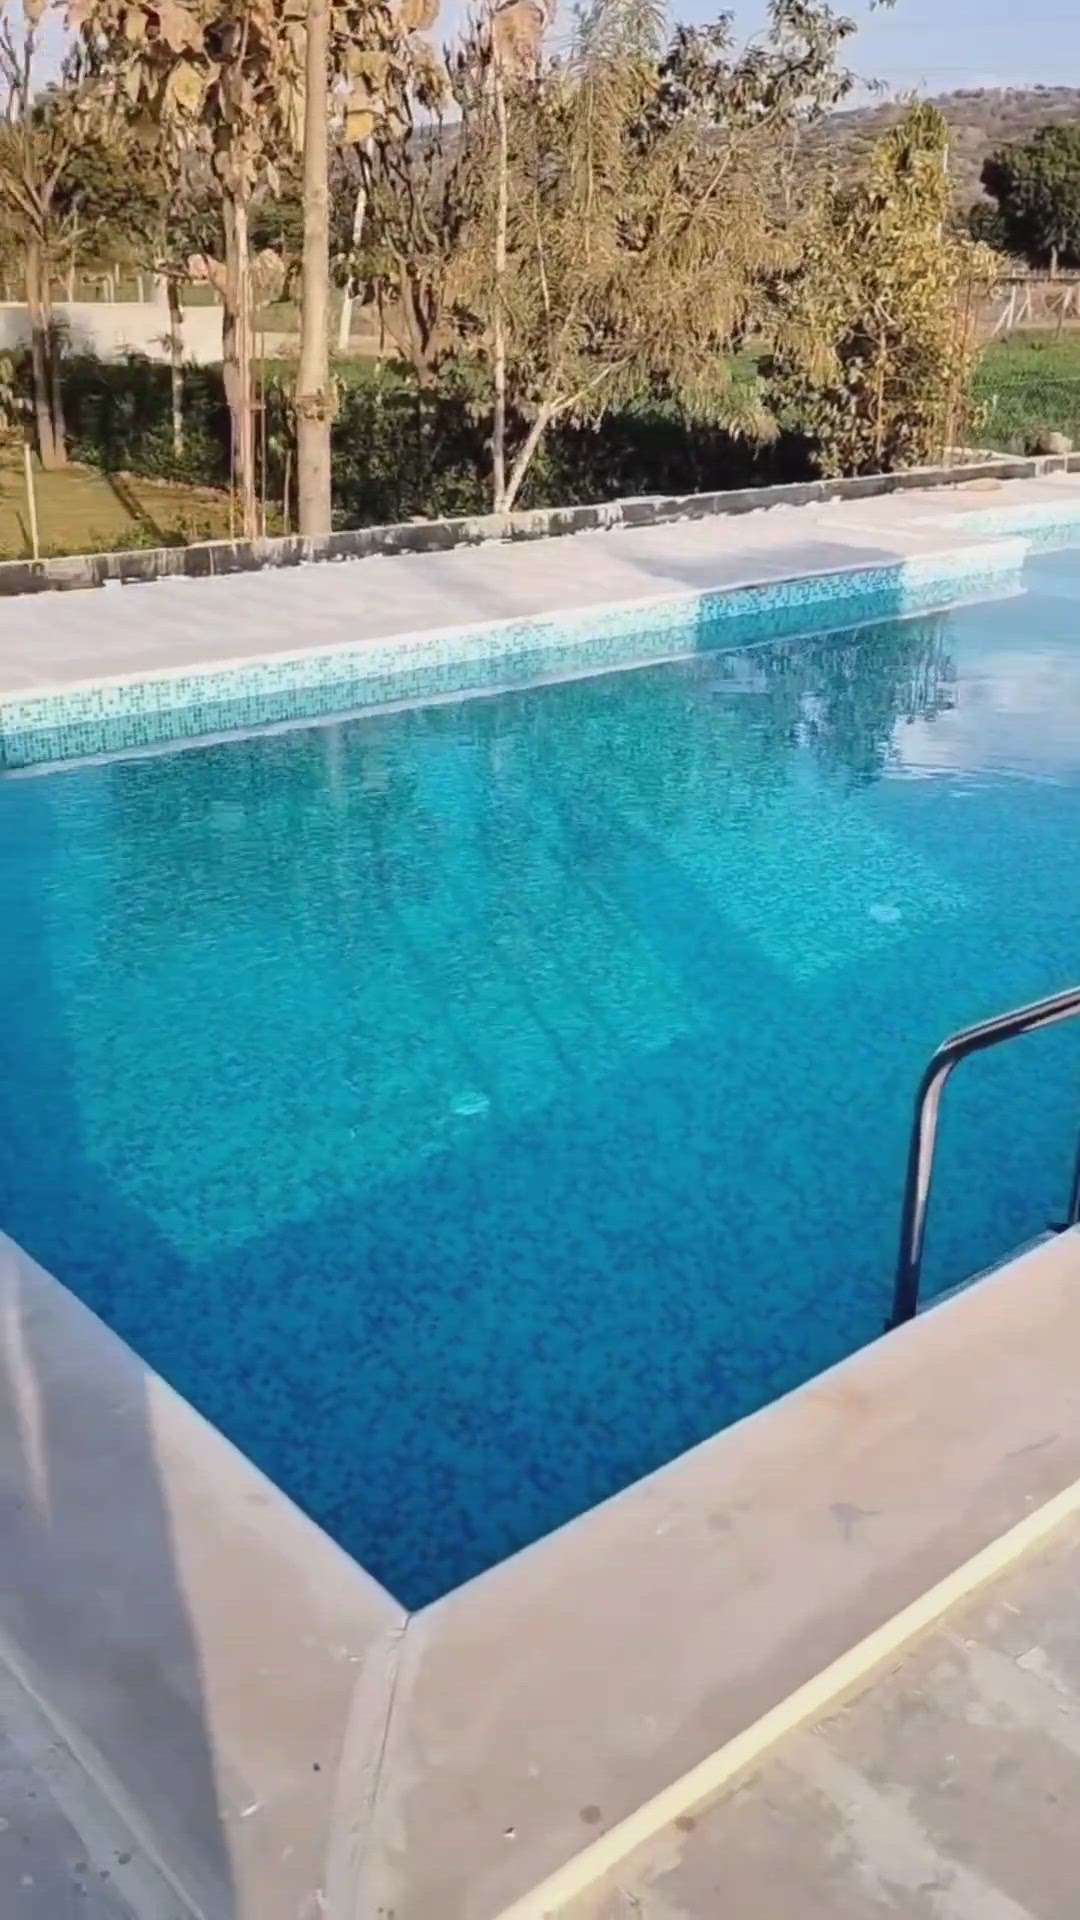 Get ready to beat the heat with your personal pool #poolside #swimmingpoolconstructionconpany  #farmhouse